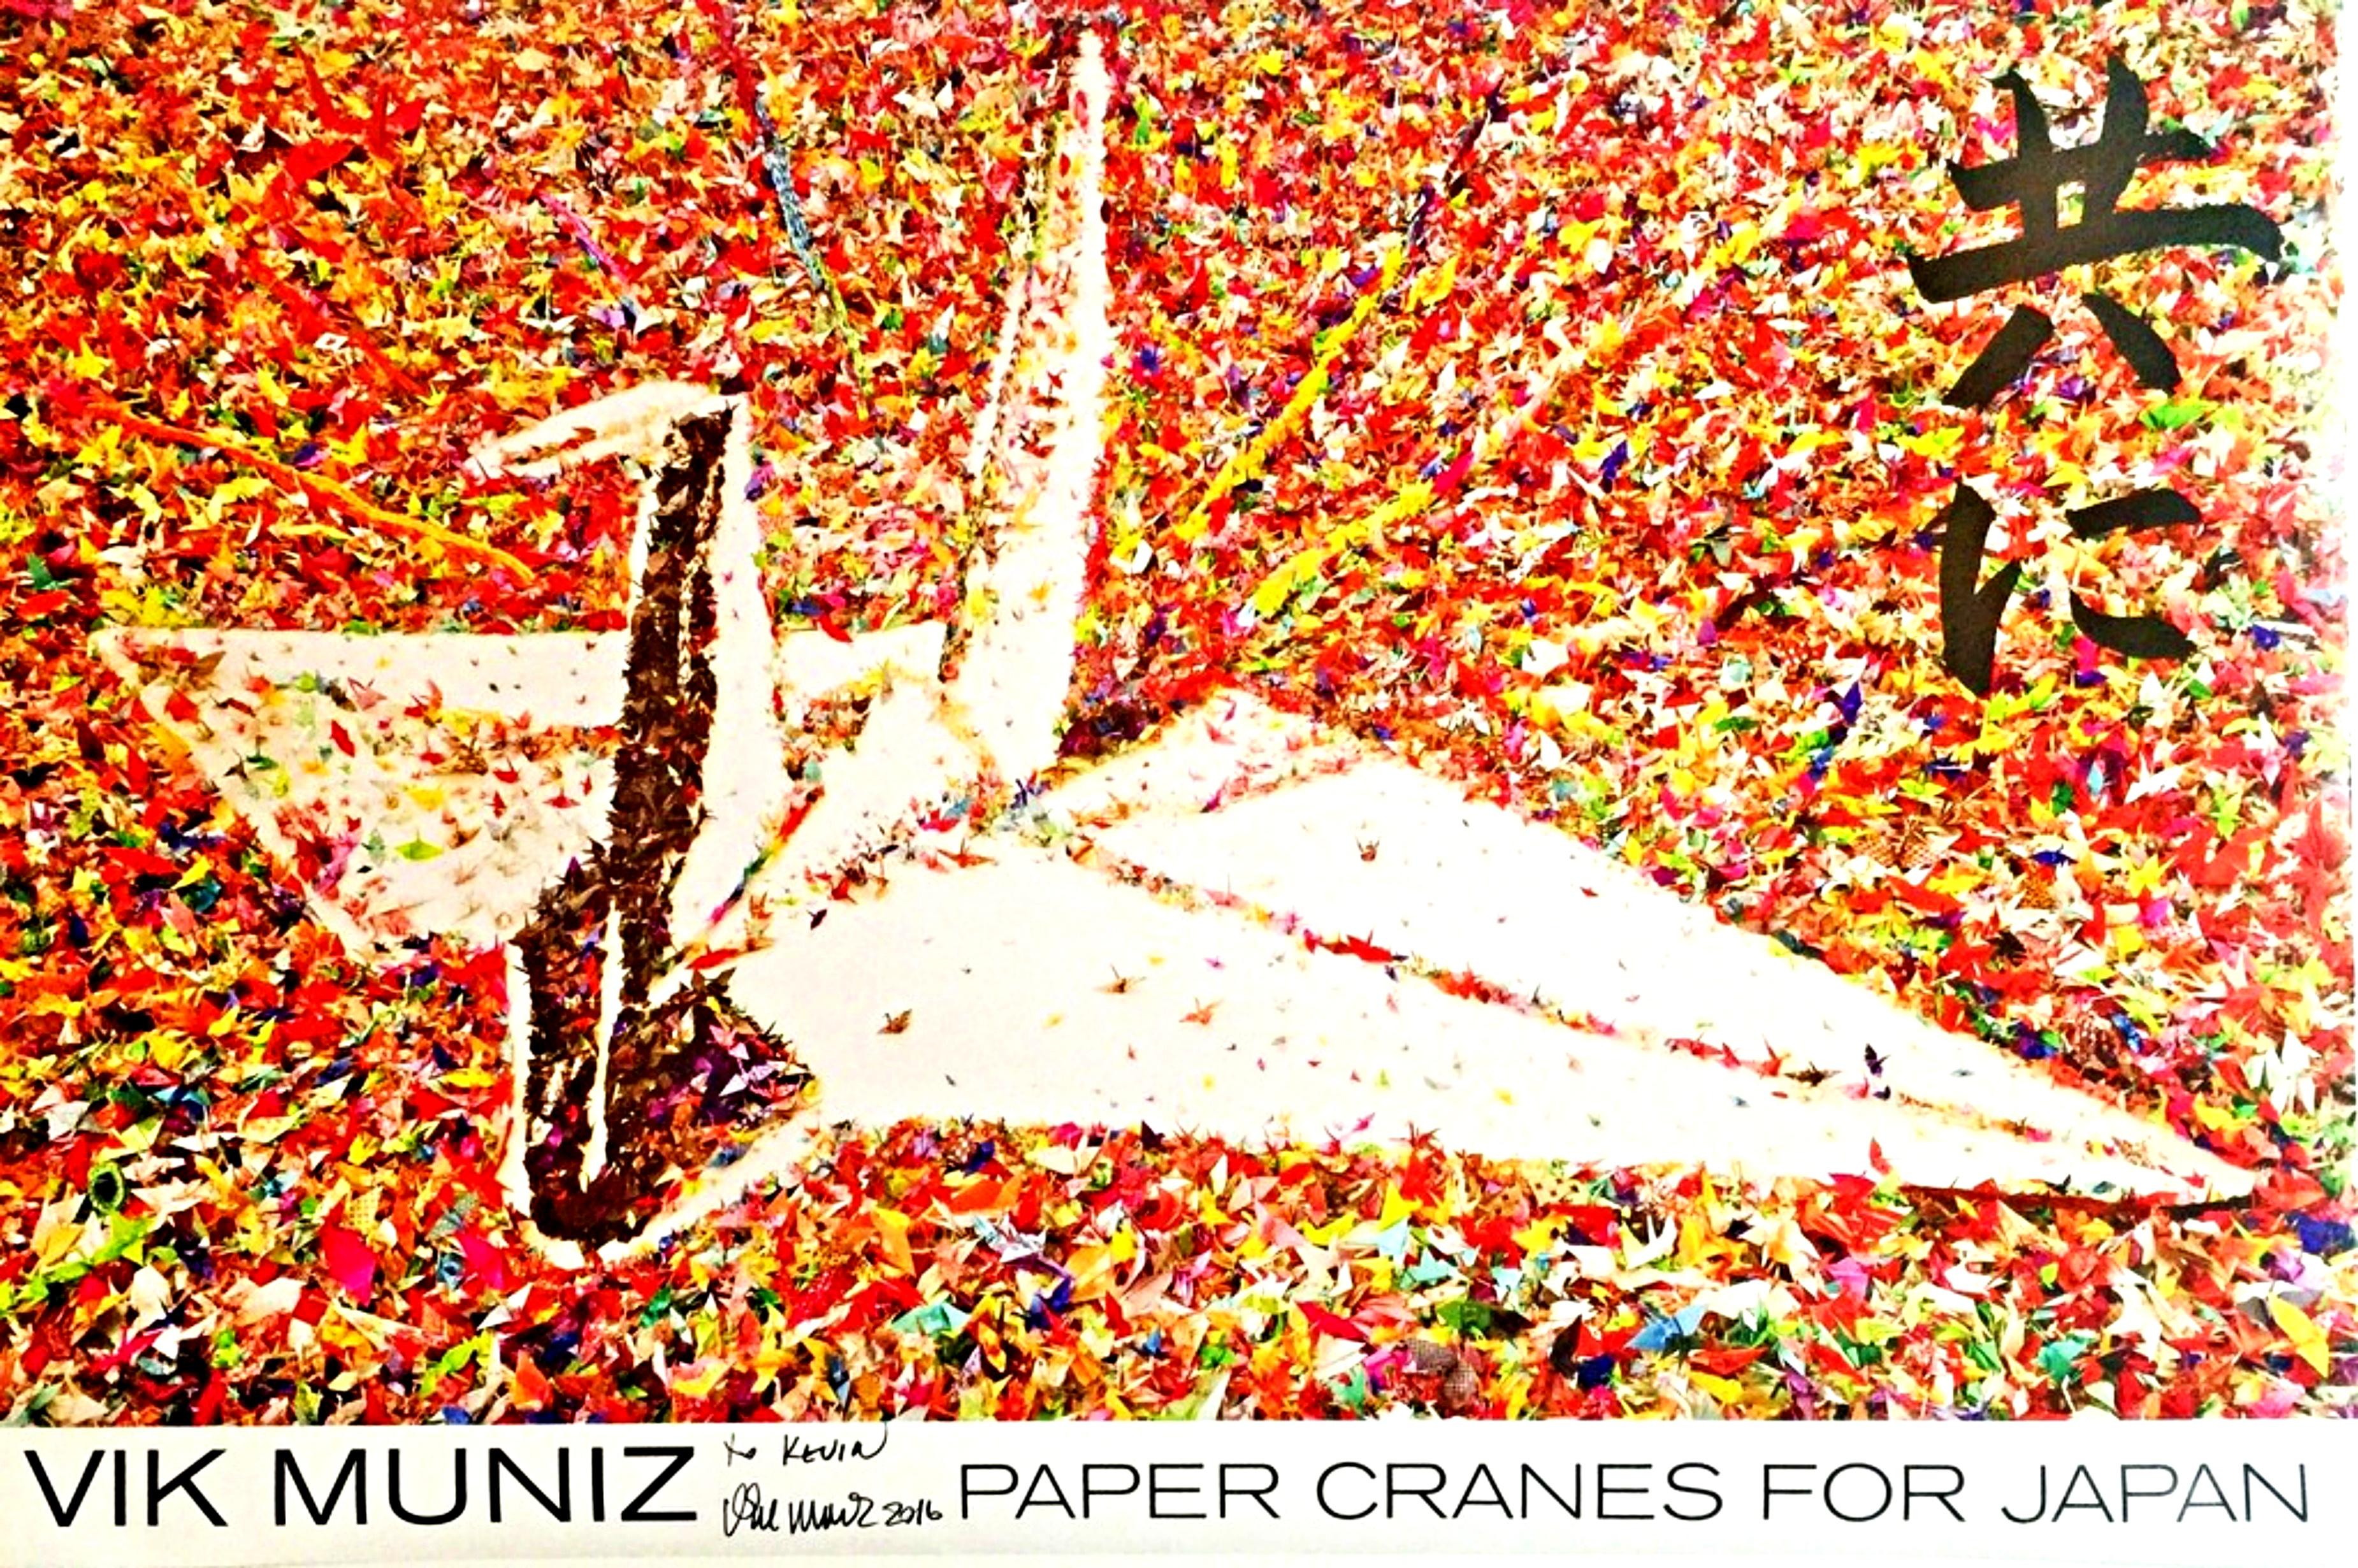 Vik Muniz Abstract Print - Paper Crane for Japan (Hand Signed and Inscribed to Kevin)